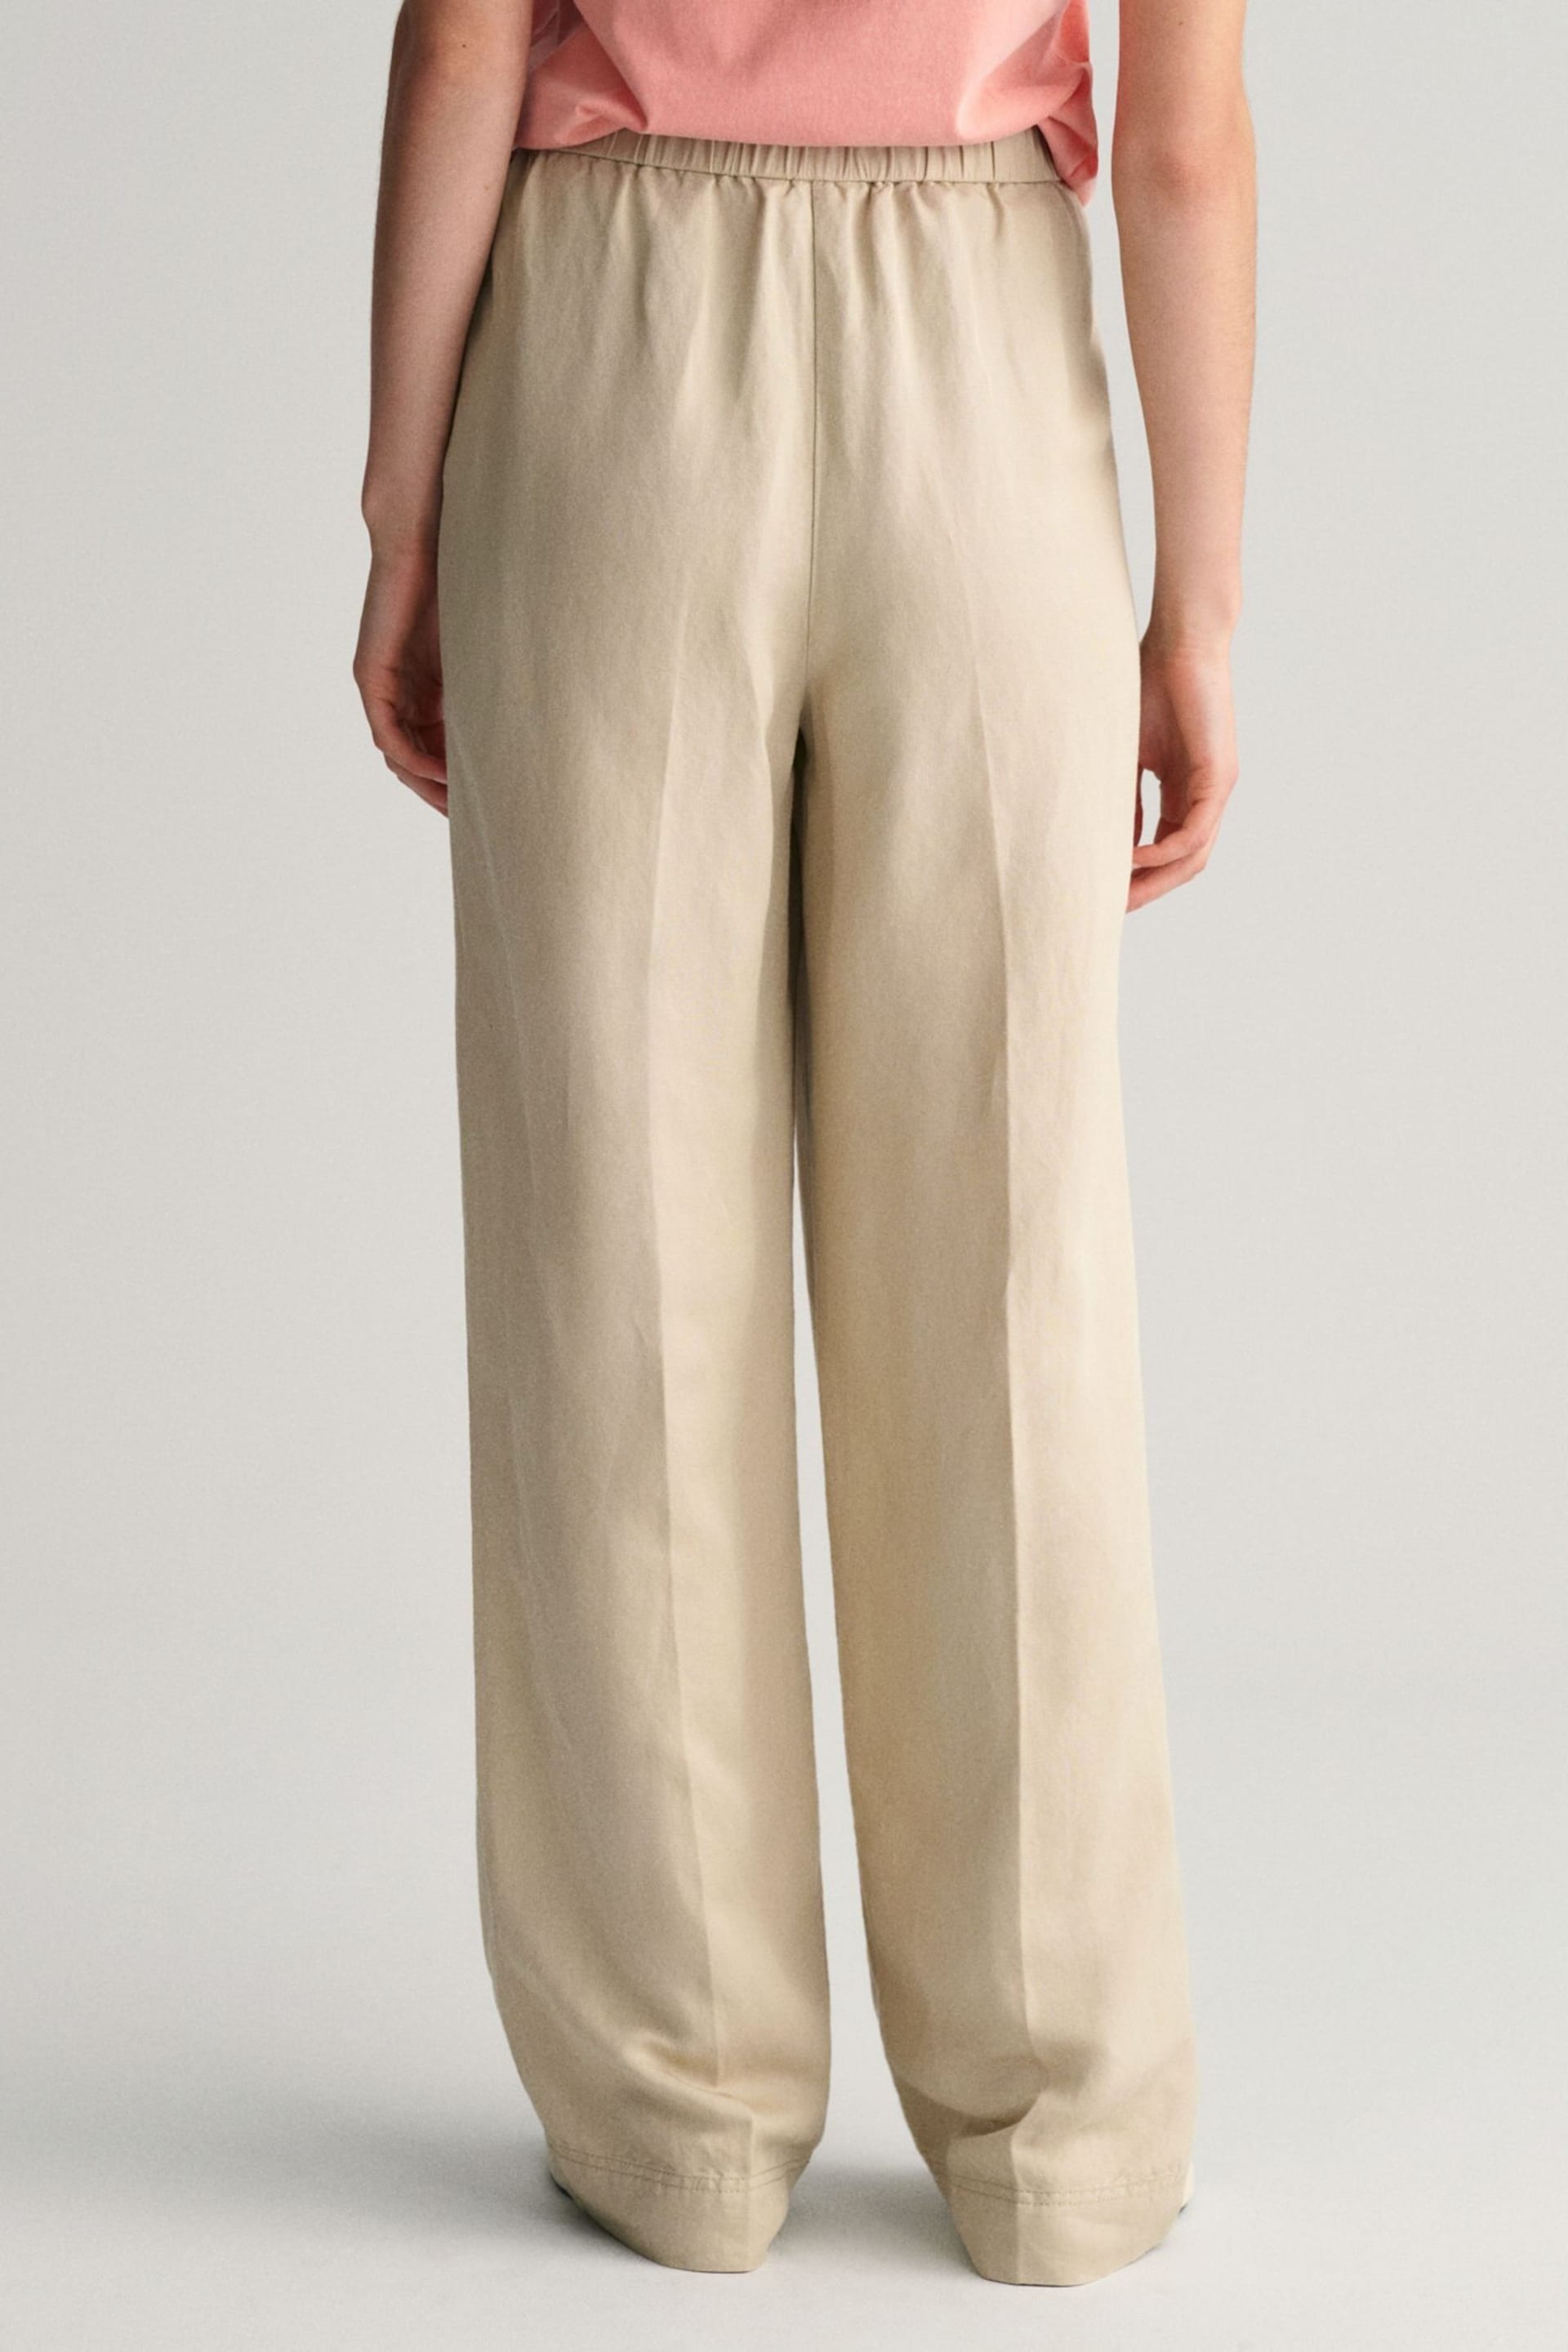 GANT Cream Relaxed Fit Linen Blend Pull-On Trousers - Image 2 of 8